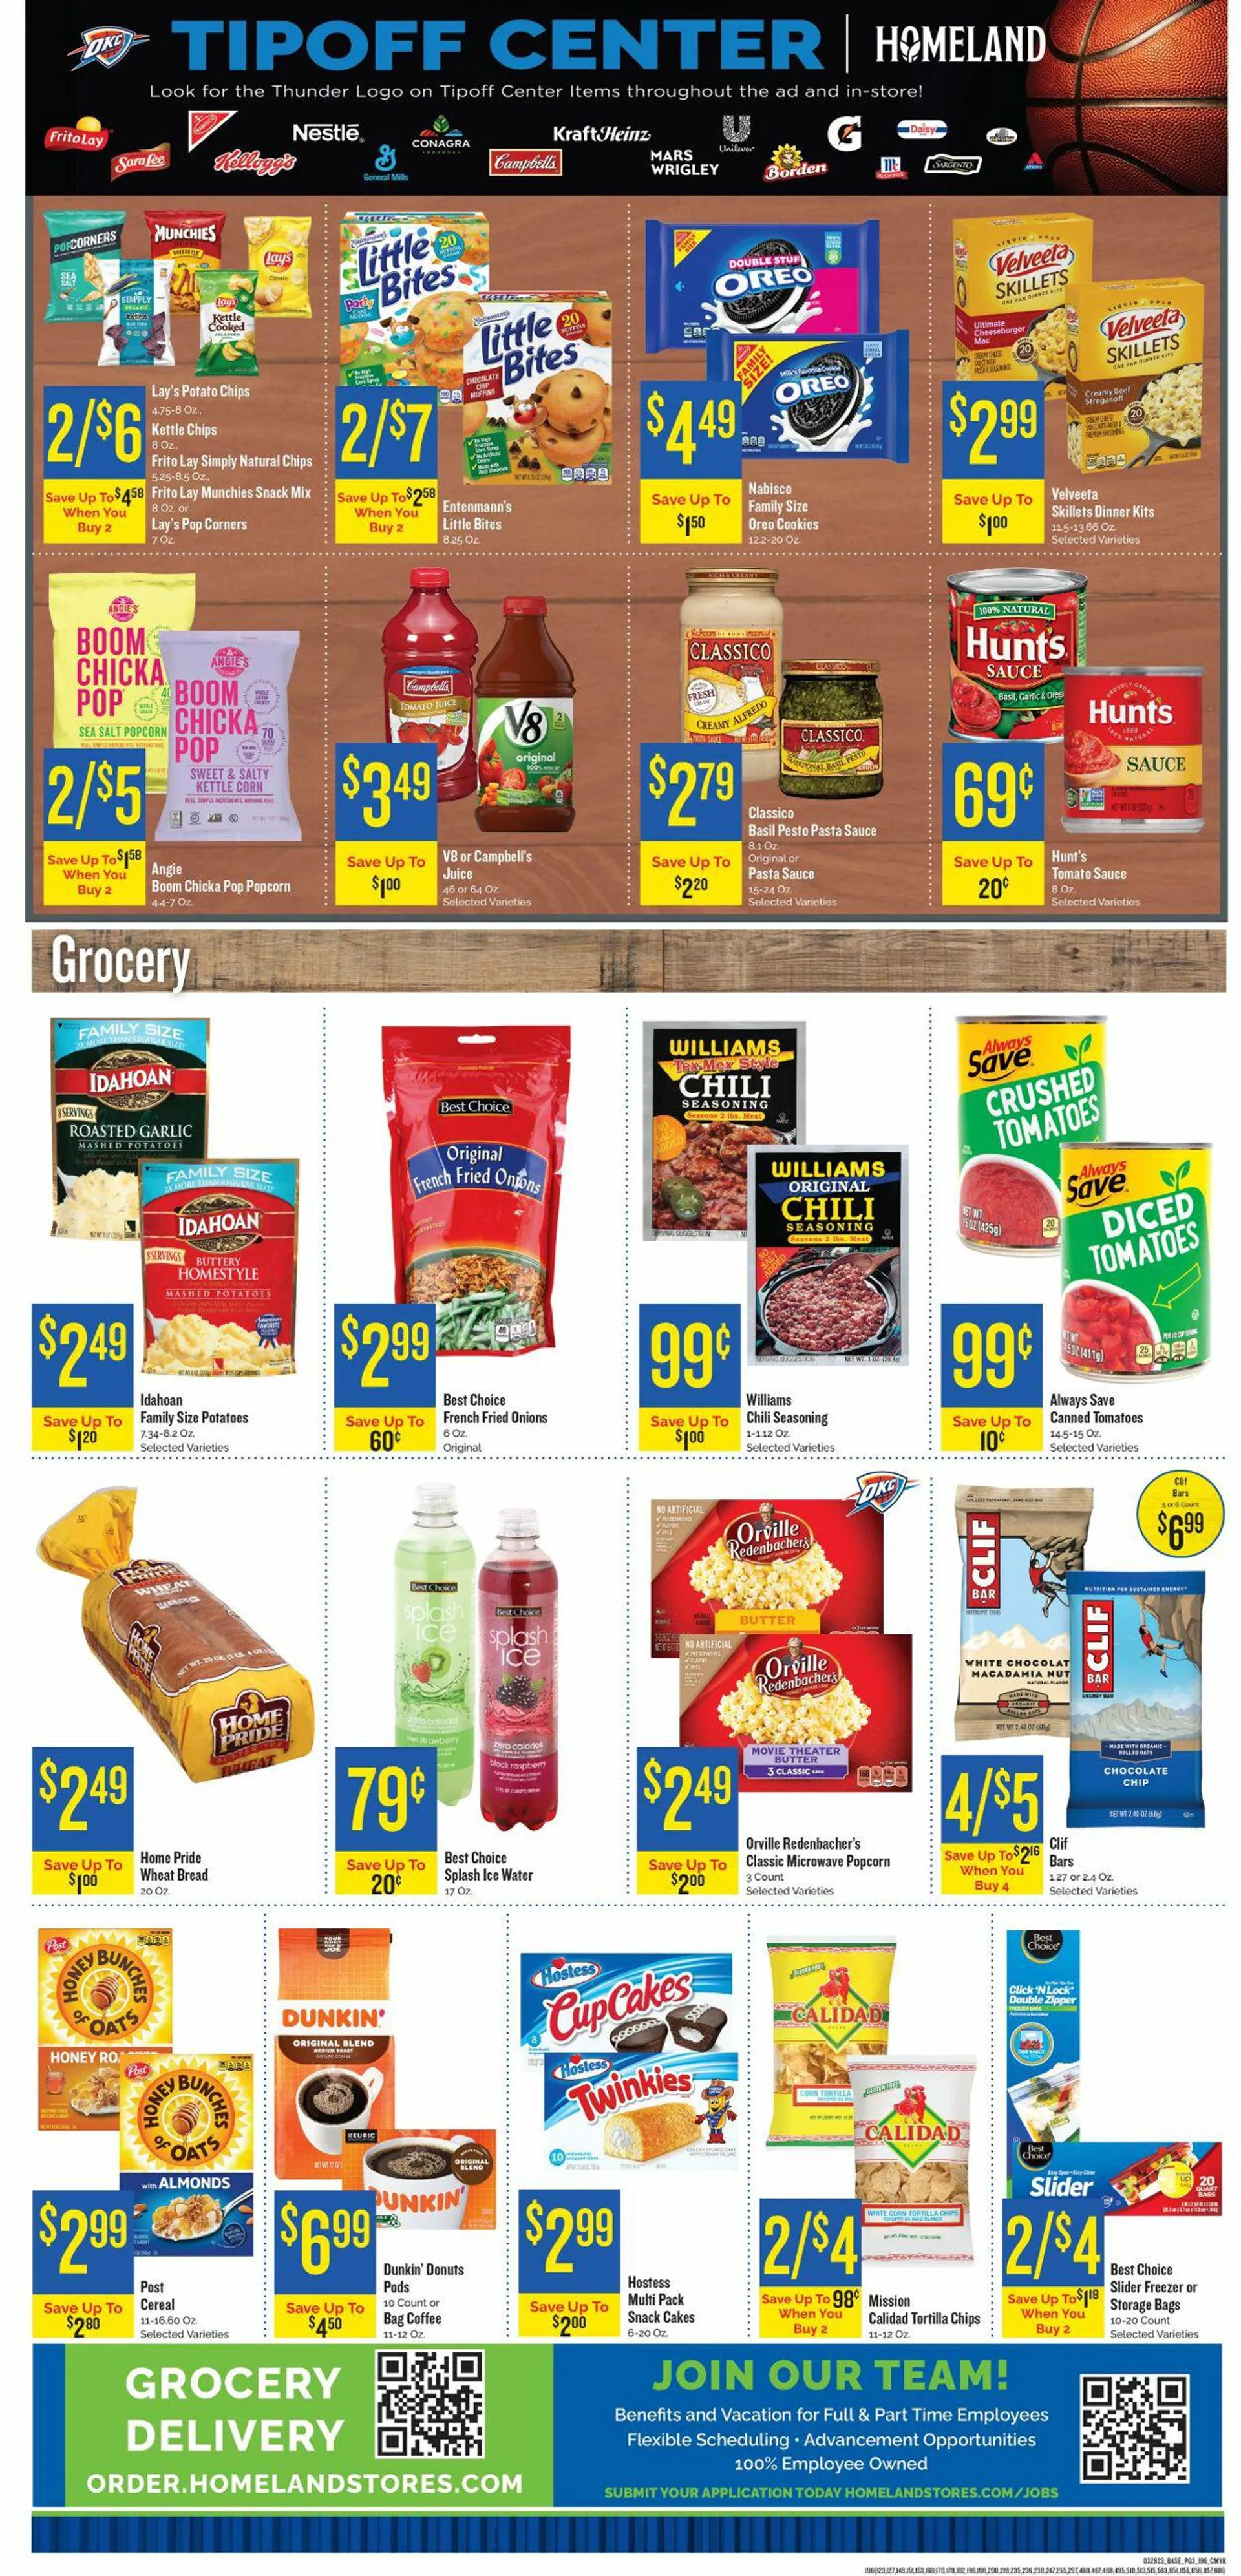 Homeland Current weekly ad - 3